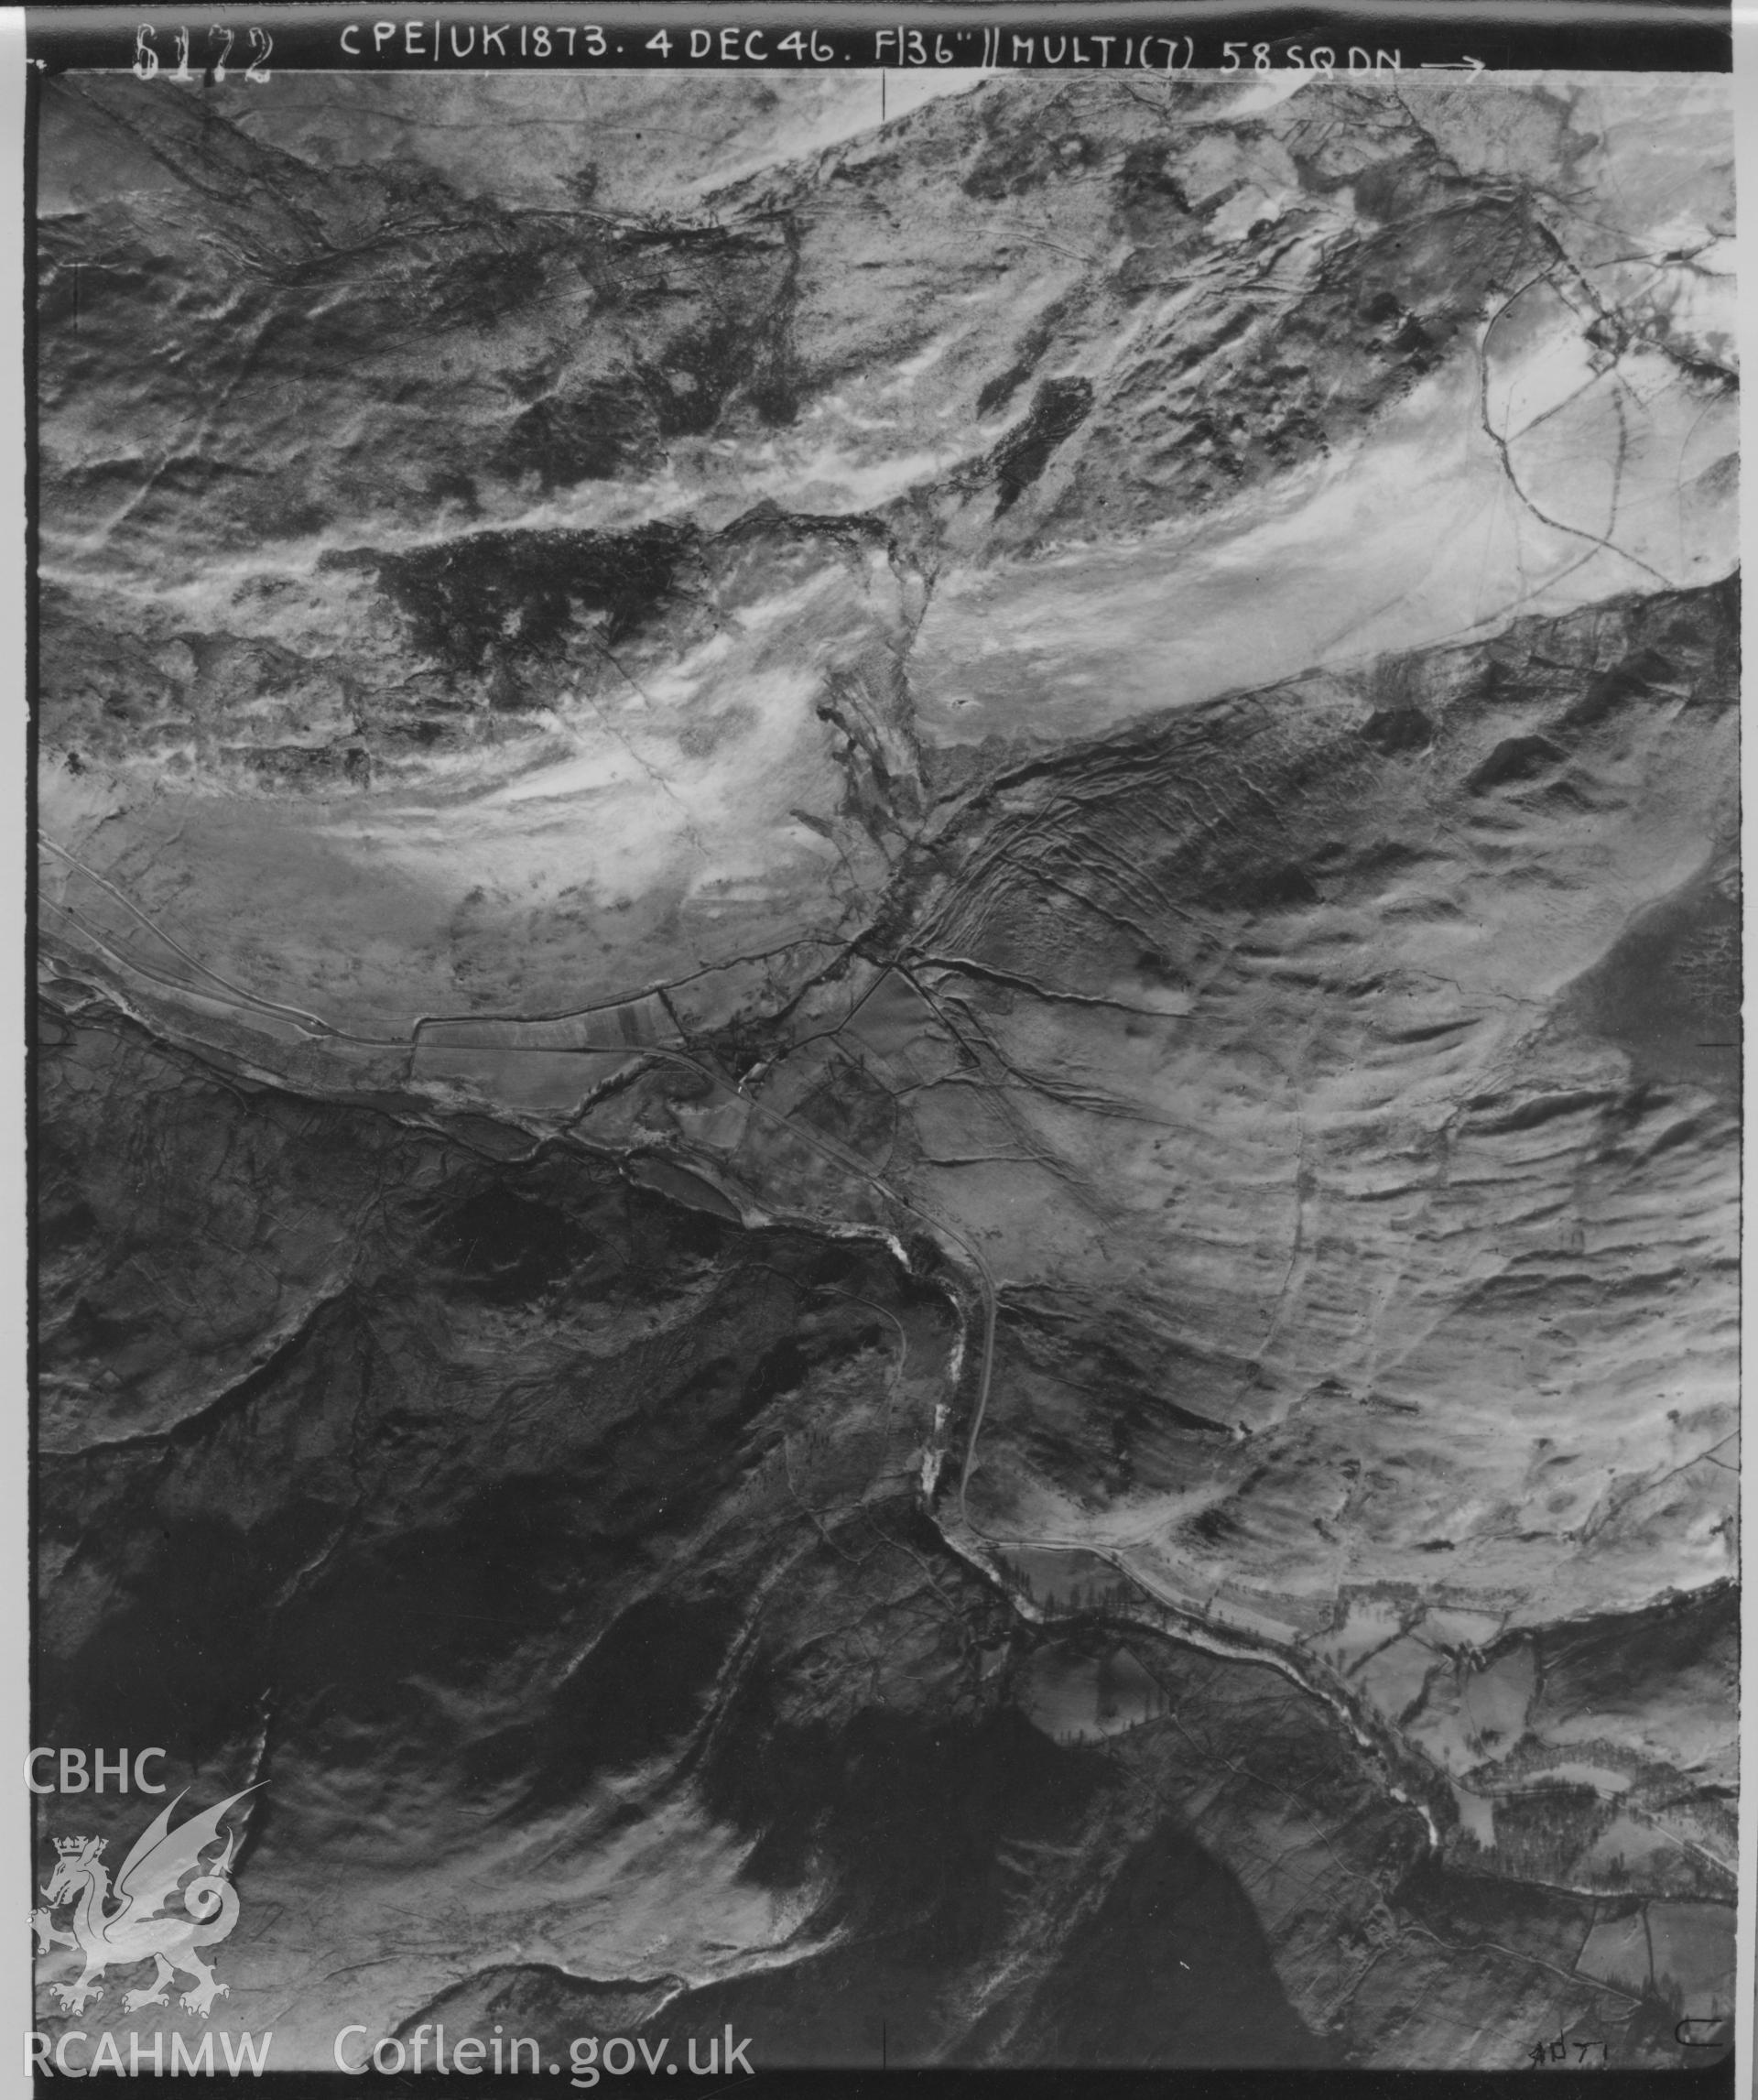 Aerial photograph of the Elan Valley, dated 1946. Included in material relating to Archaeological Desk Based Assessment of Afon Claerwen, Elan Valley, Rhayader, Powys. Assessment conducted by Archaeology Wales in 2017-18. Report no. 1633. Project no. 2573.